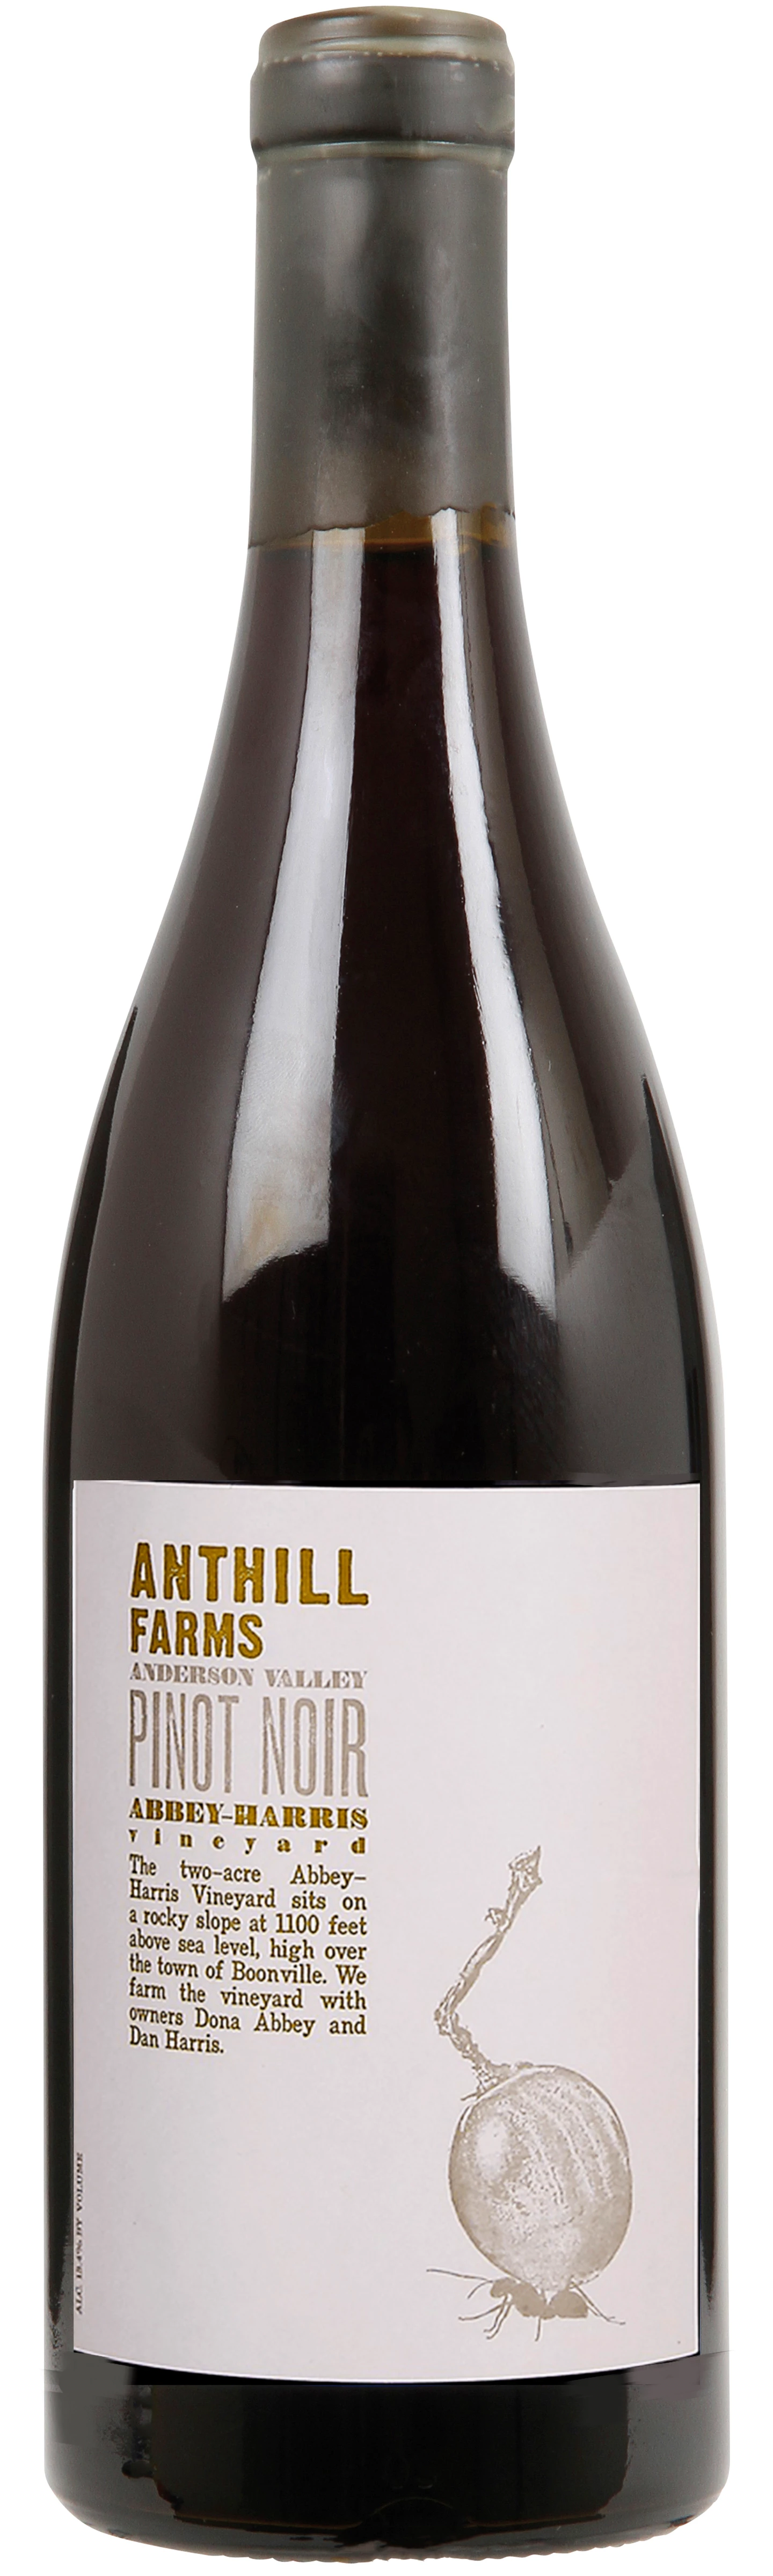 Anthill-farms_Anderson-Valley-Abbey-Harris-Vineyard-Pinot-Noir